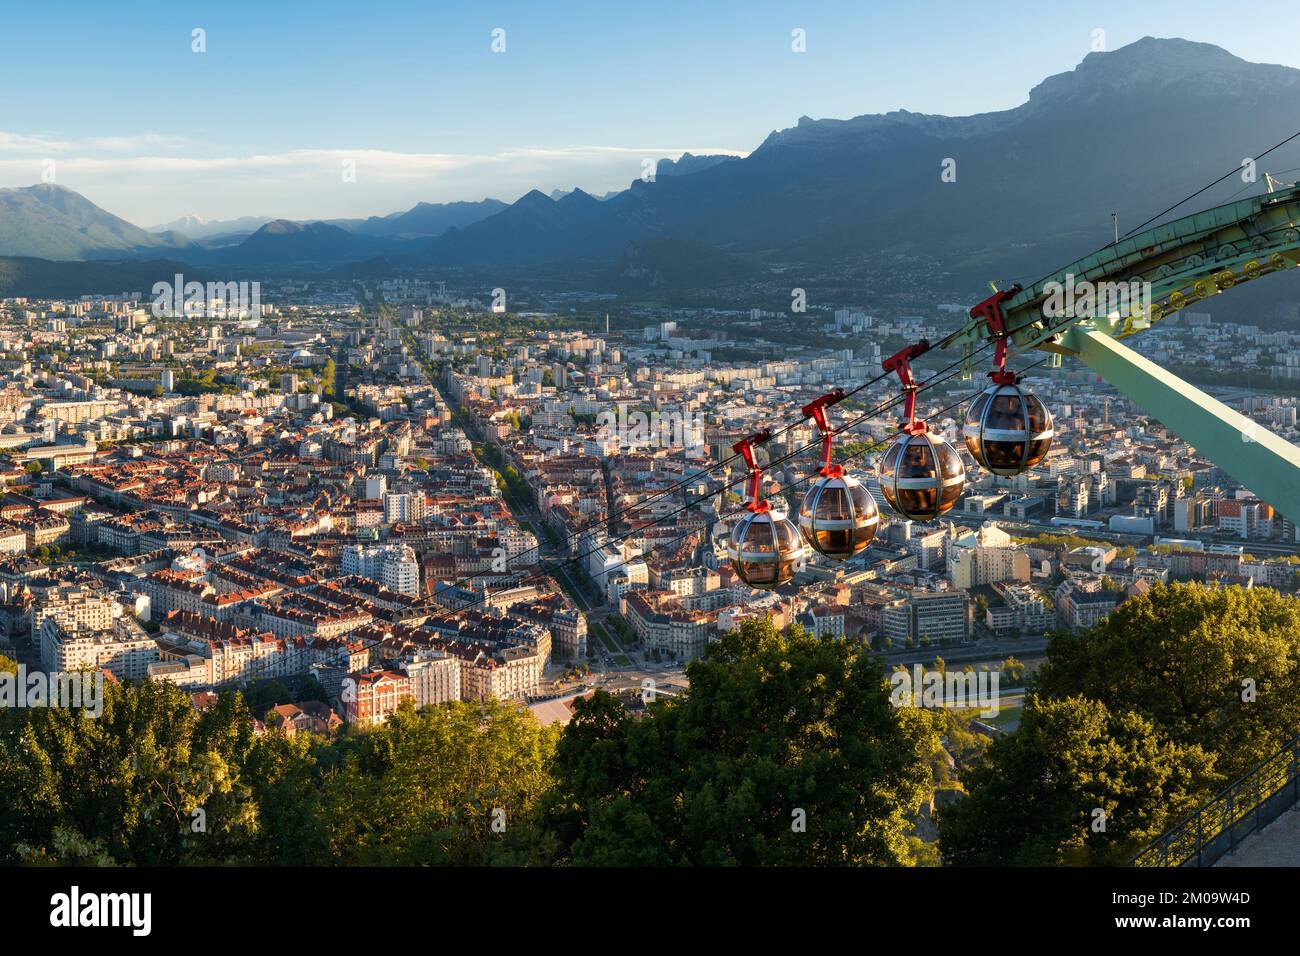 Skyline of the city of Grenoble at sunset with cable cars of Fort de la Bastille. Summer in Isere, Rhone-Alpes region, France Stock Photo